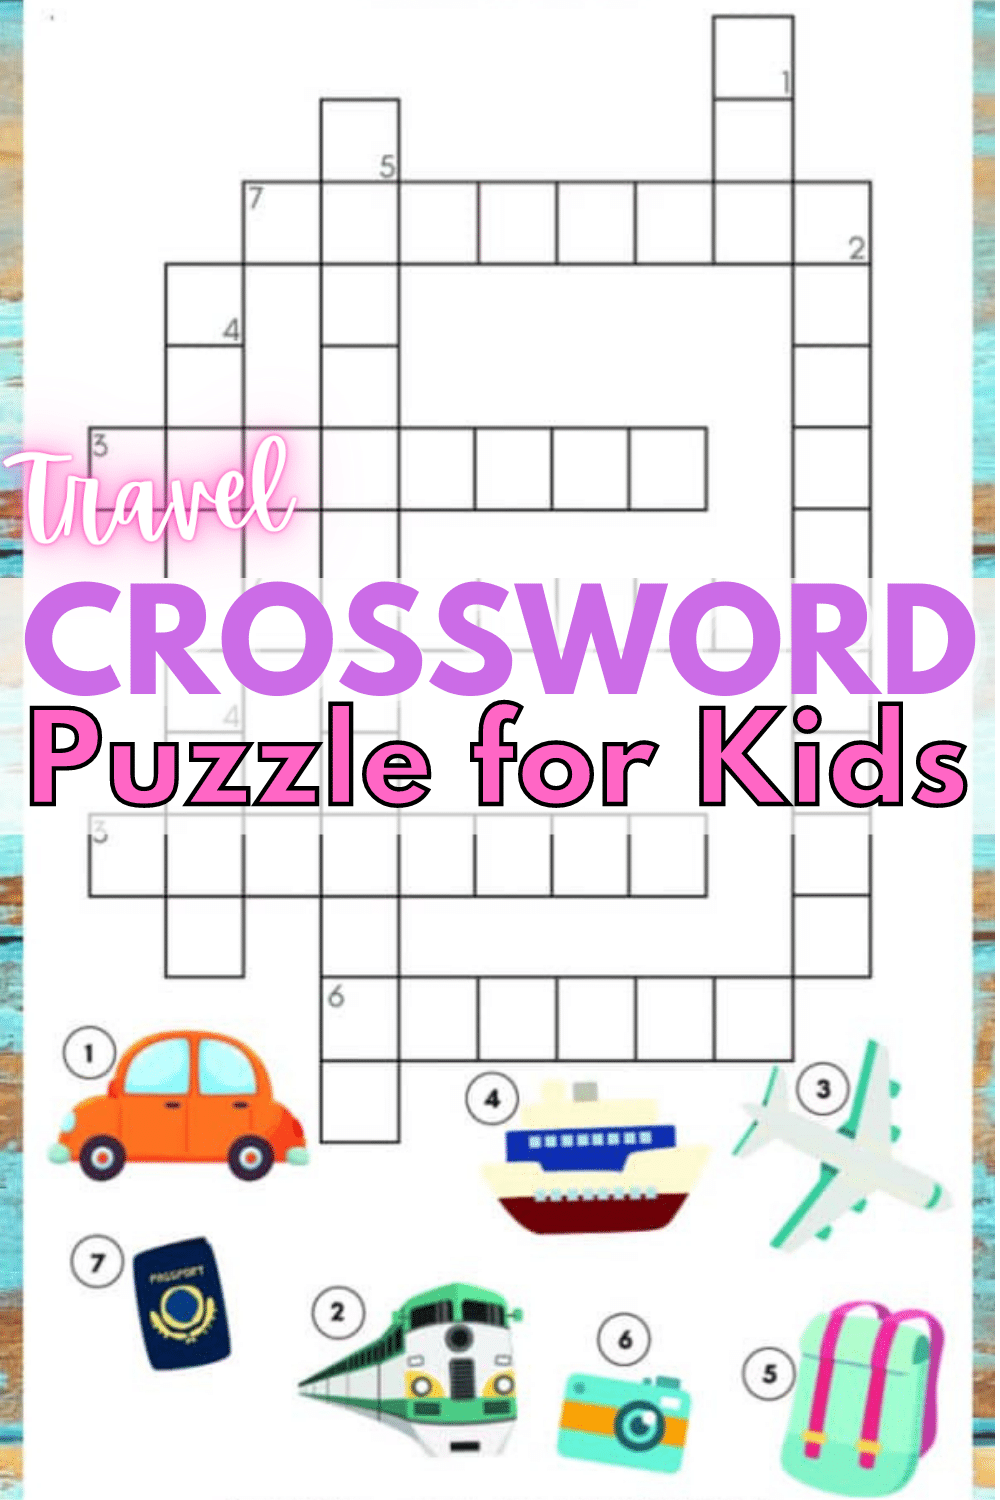 A fun printable travel crossword puzzle for kids is the perfect children's activity to complete on a family road trip or before a big vacation. #crosswordpuzzle #printables #familytravel via @wondermomwannab